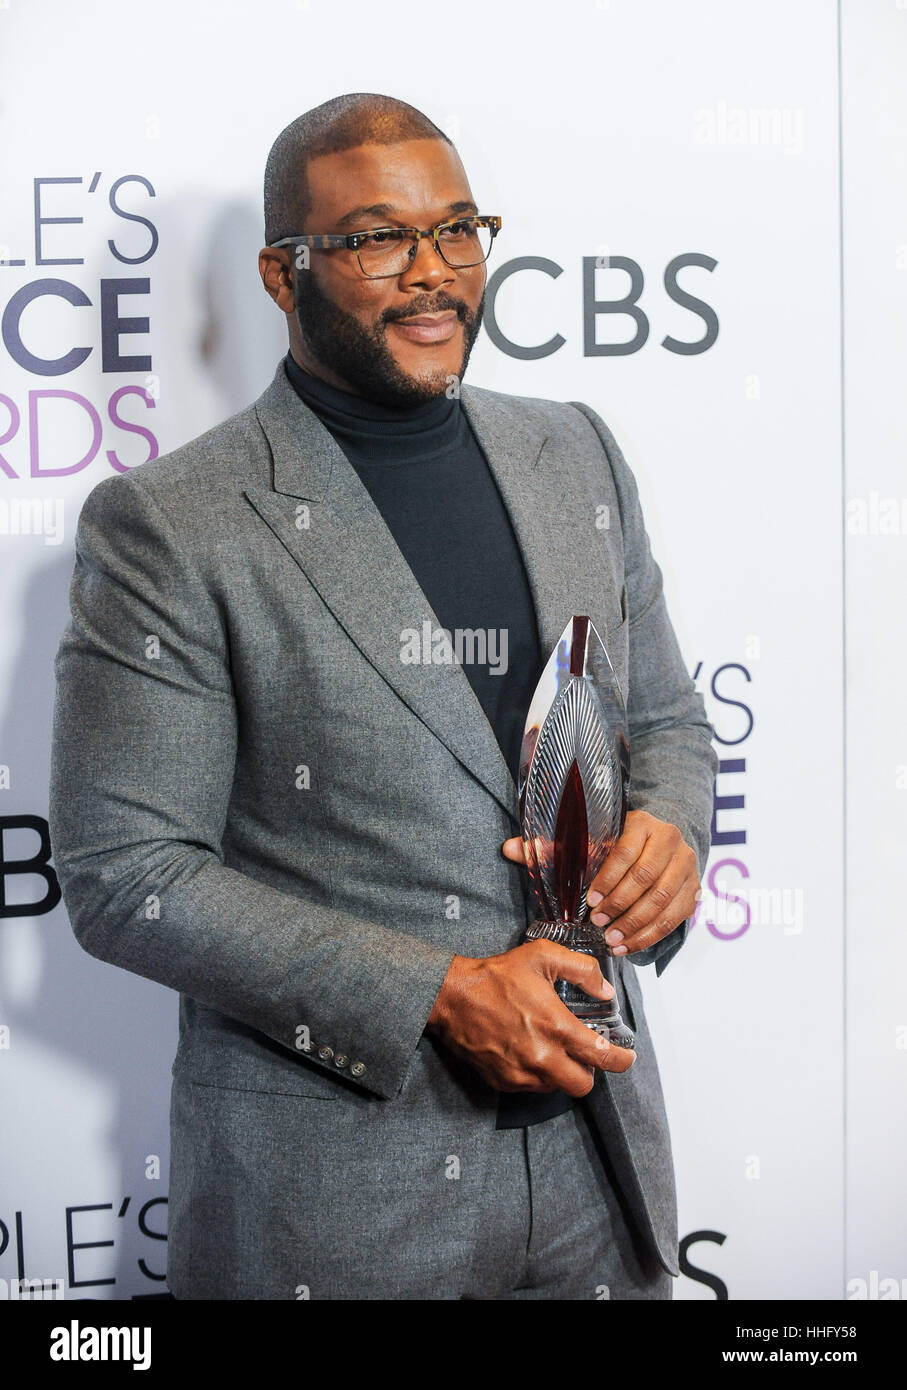 Los Angeles, USA. 18th Jan, 2017. Tyler Perry poses with the award for Favorite Humanitarian of the People's Choice Awards at the Microsoft Theater in Los Angeles, the United States, Jan. 18, 2017. Credit: Zhang Chaoqun/Xinhua/Alamy Live News Stock Photo